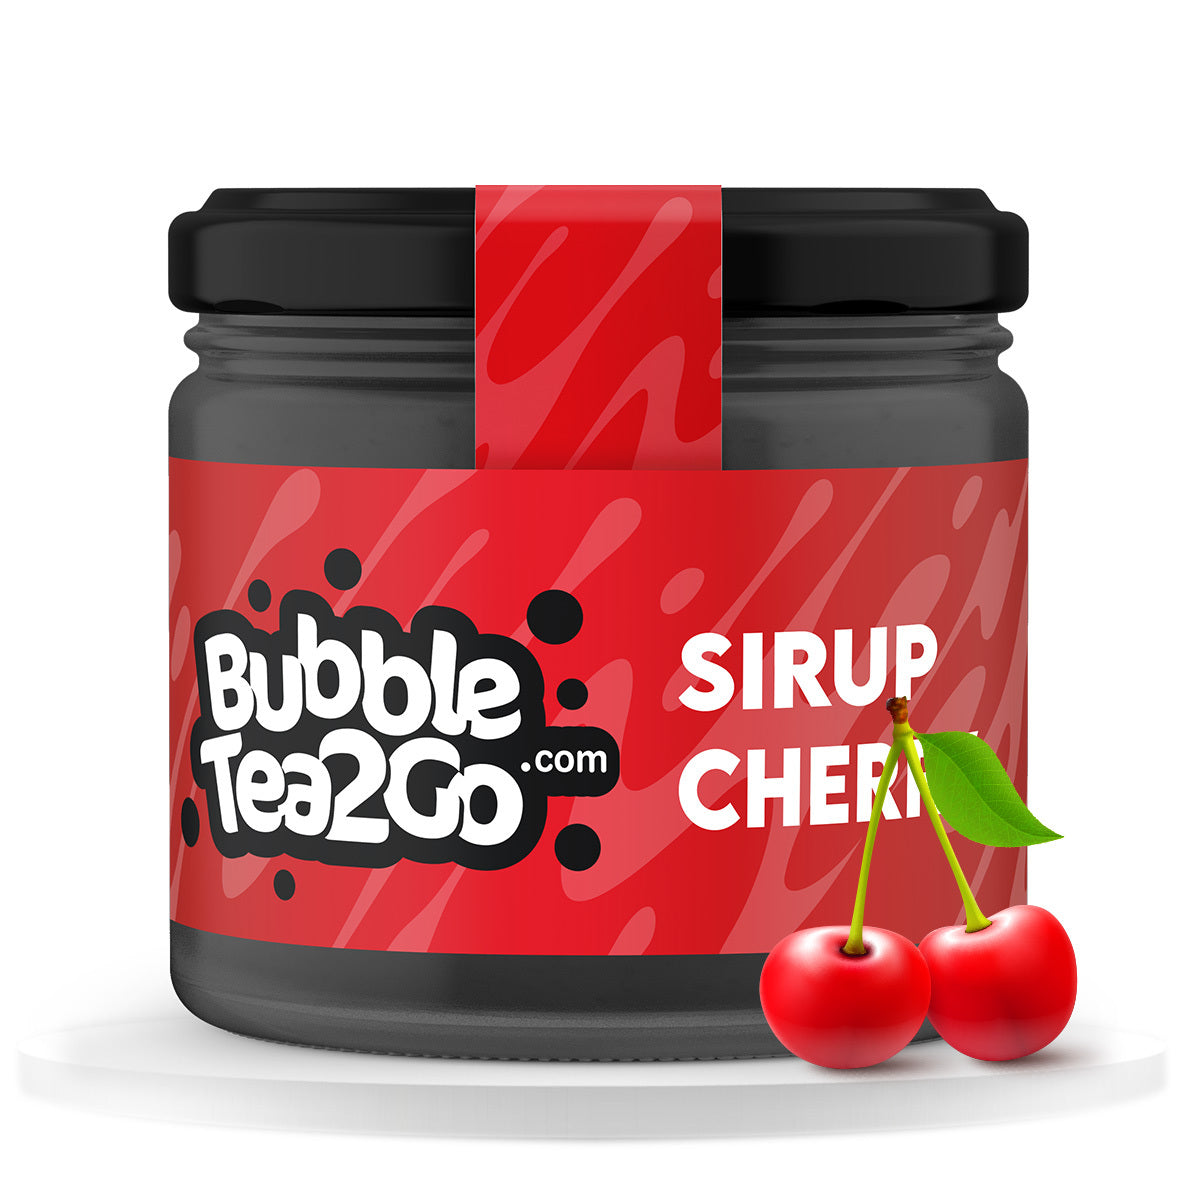 Sirop - Cherry 2 portions (50g)